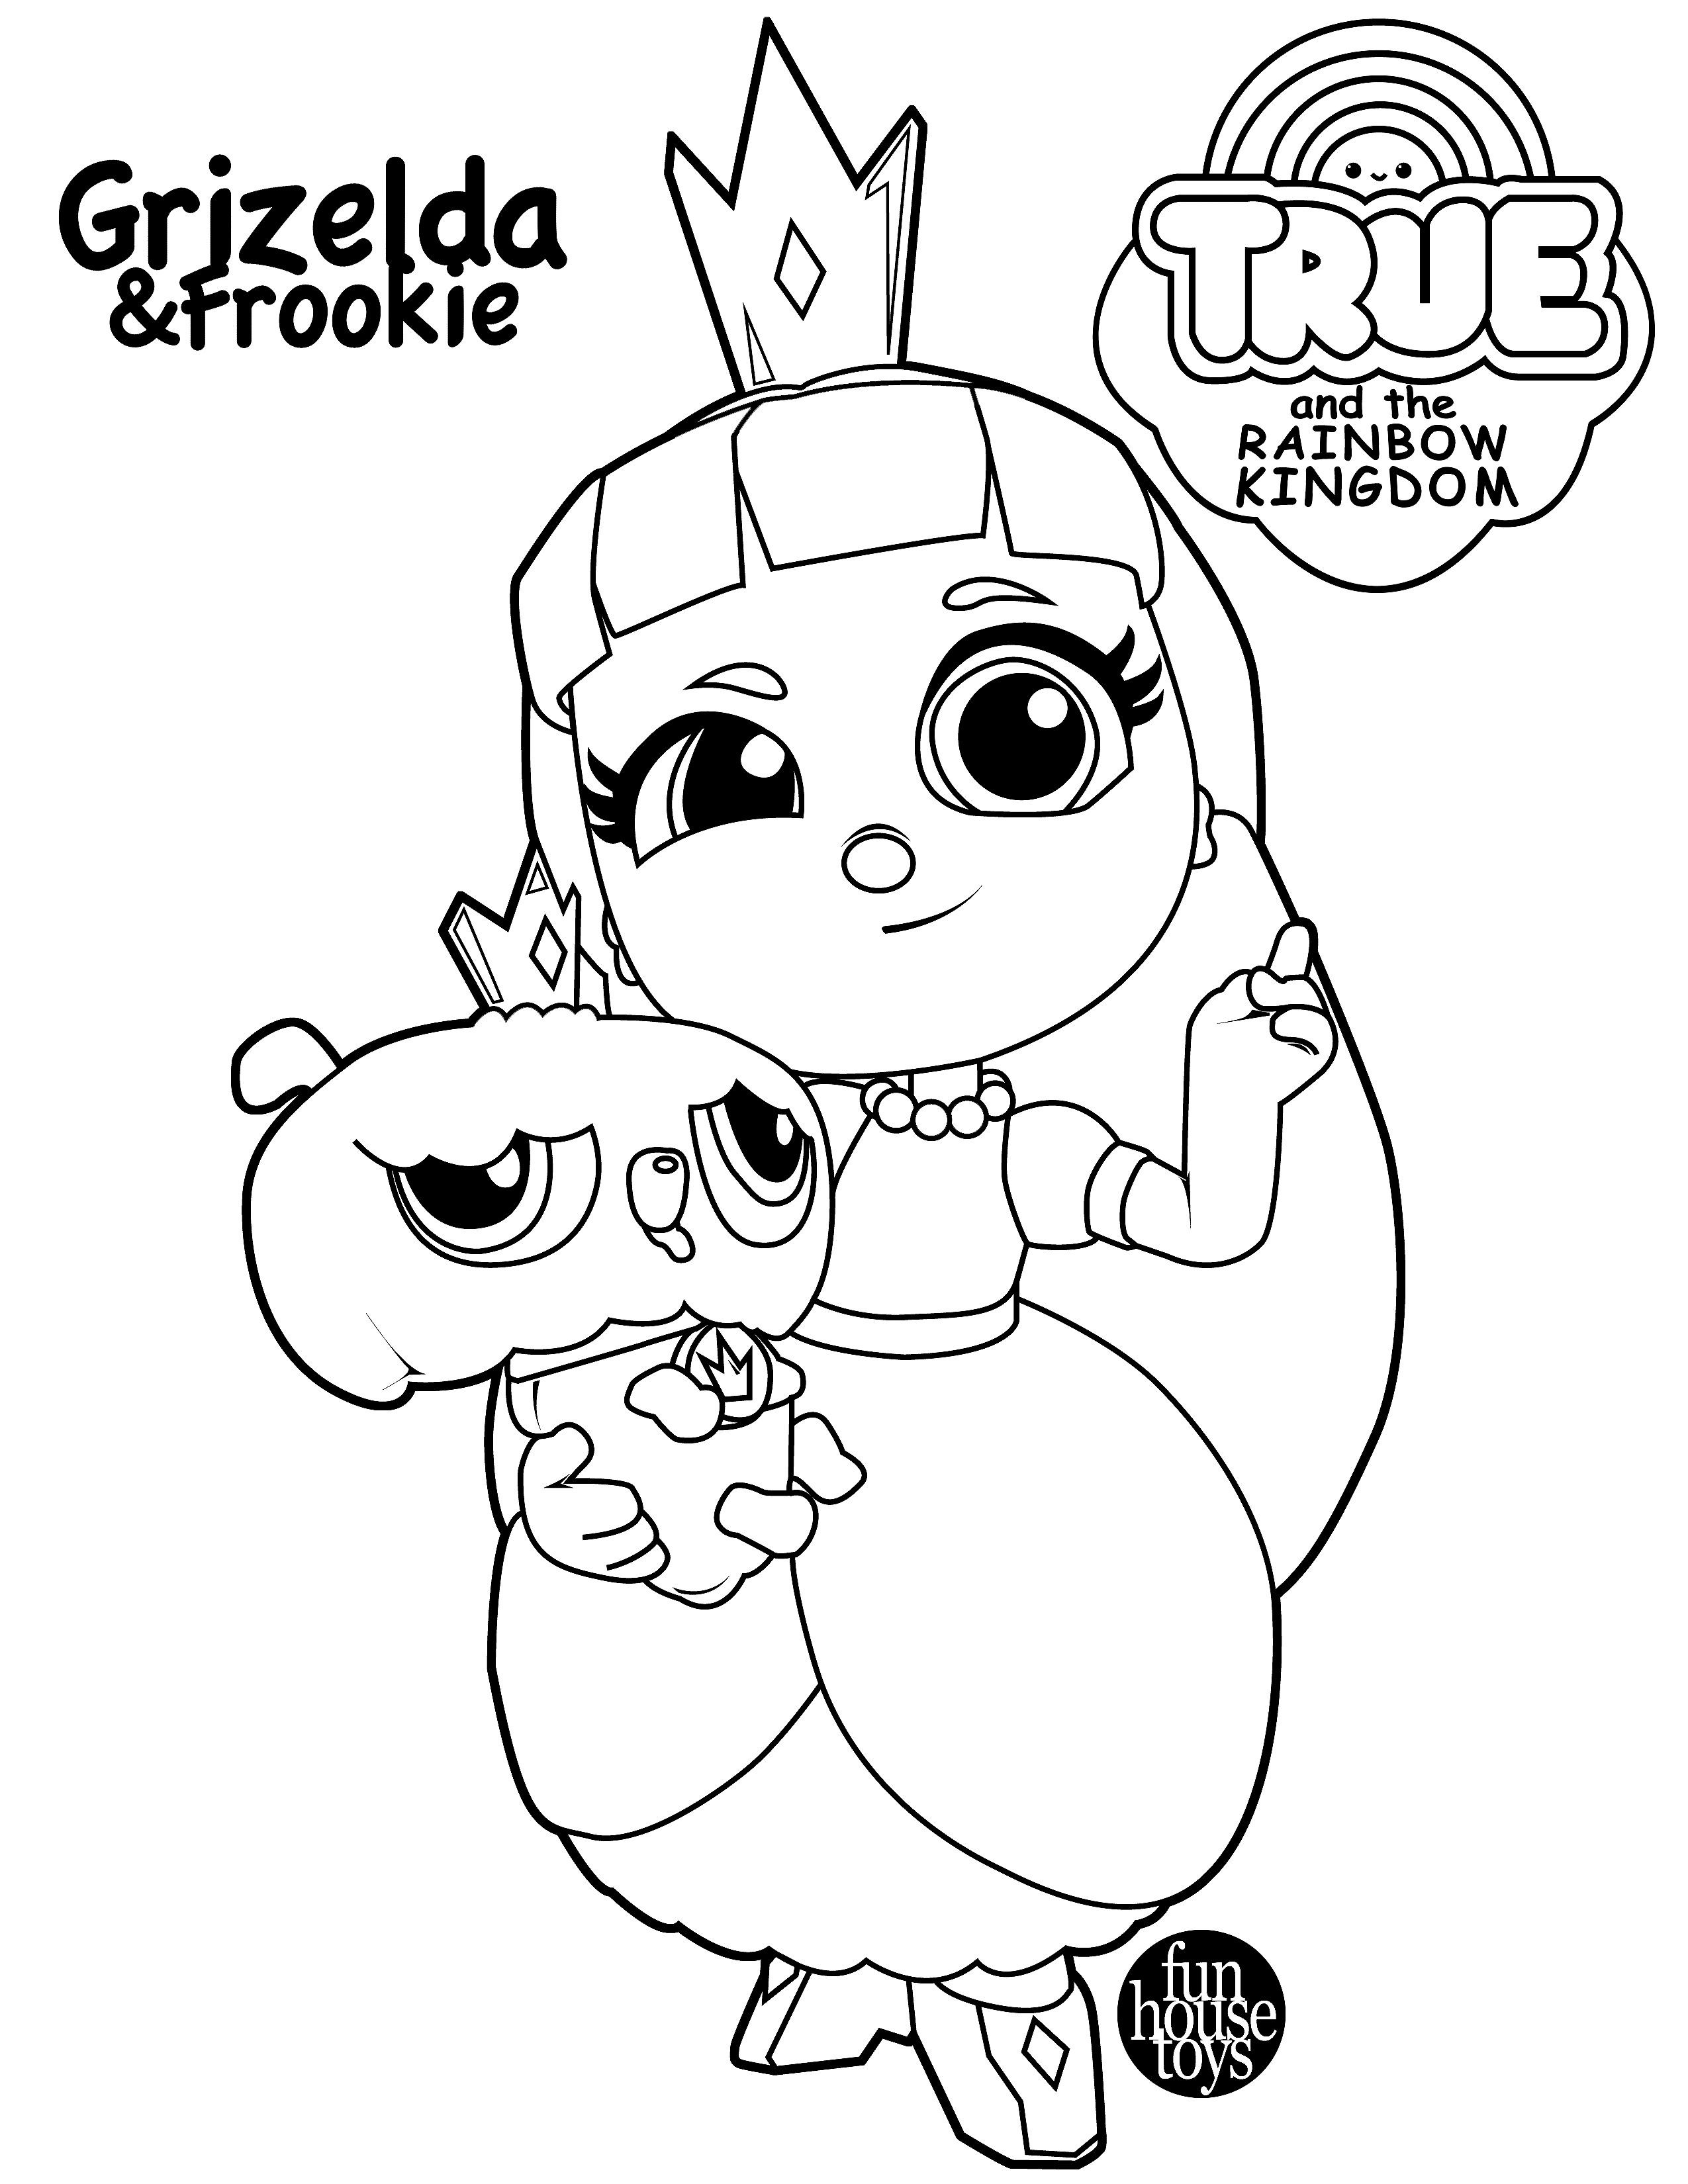 True And The Rainbow Kingdom Coloring Pages
 Pin by Tracy Bonham on embroidery in 2019